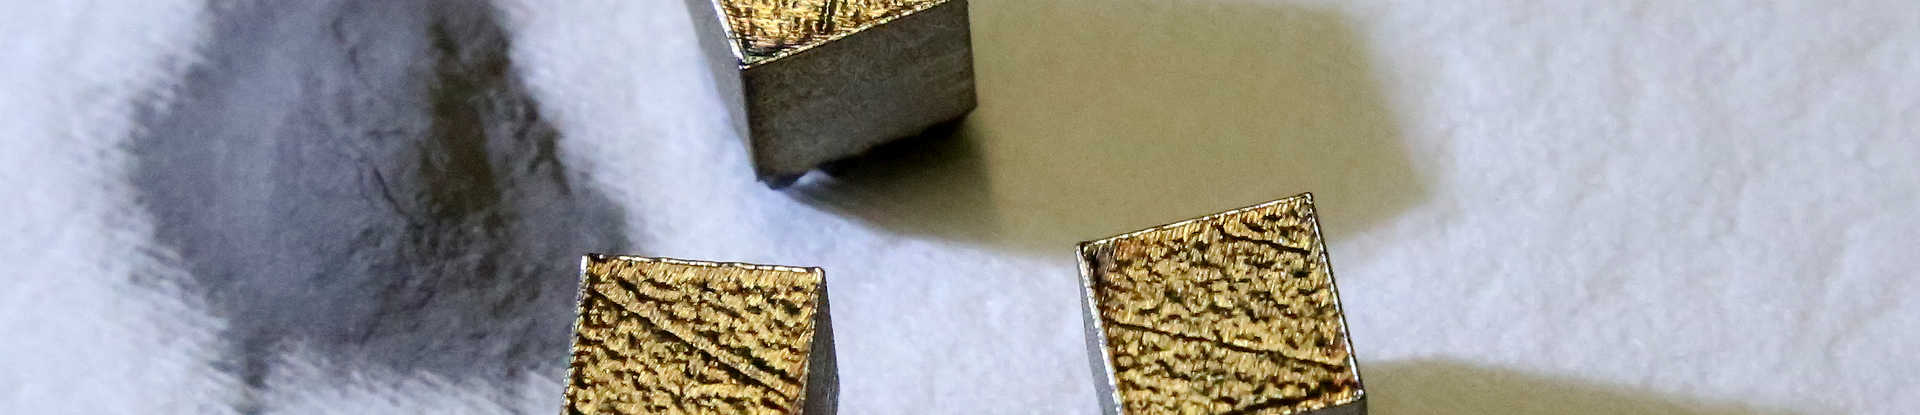 Metal powder in a pile on the left, three small metal cubes on the right